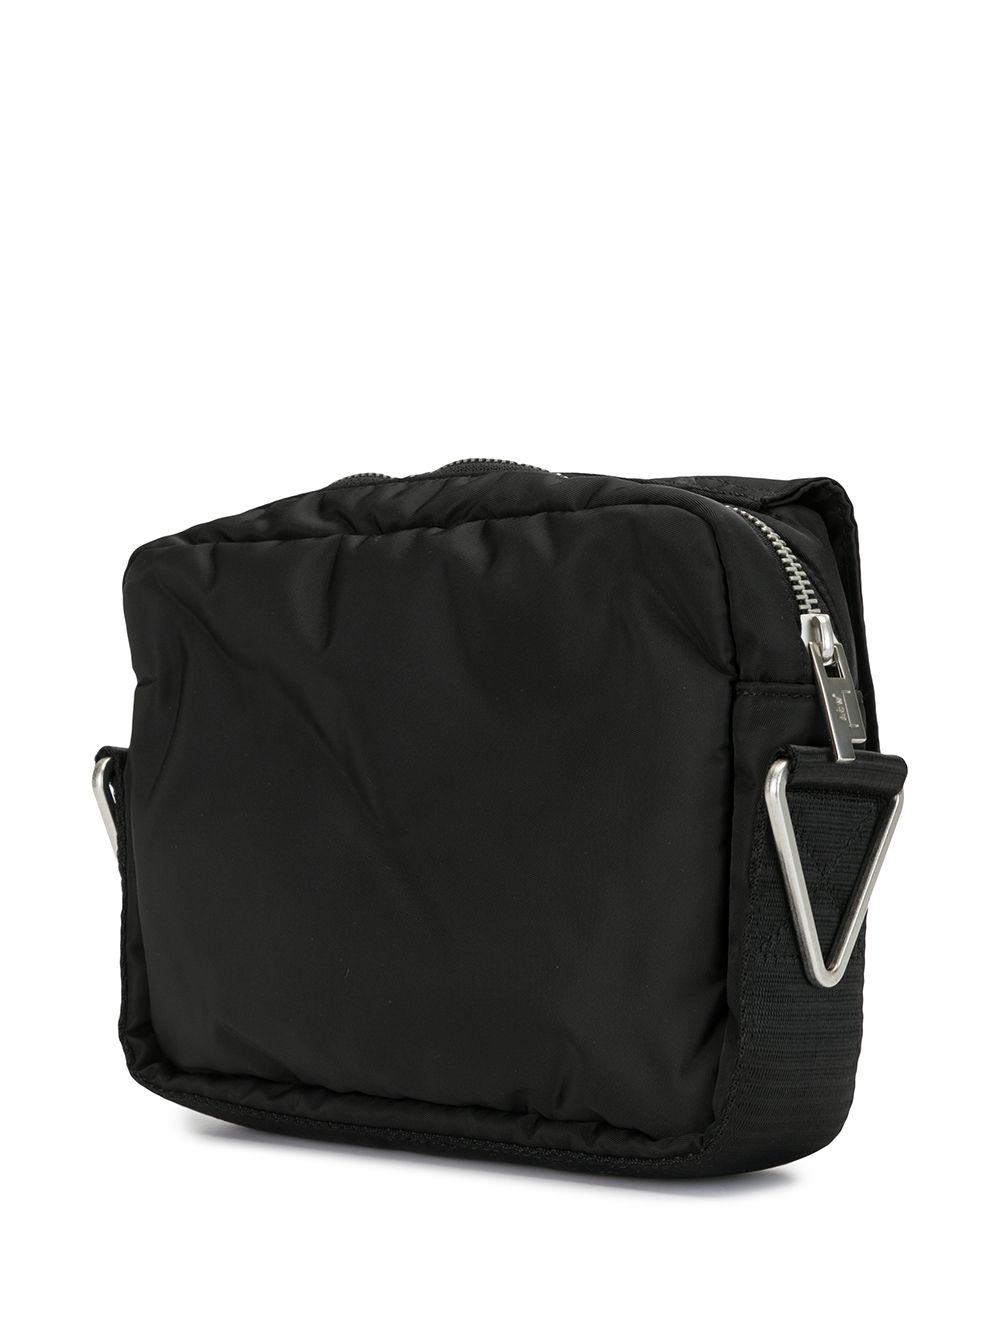 A-COLD-WALL* Padded Envelope Shoulder Bag - Farfetch